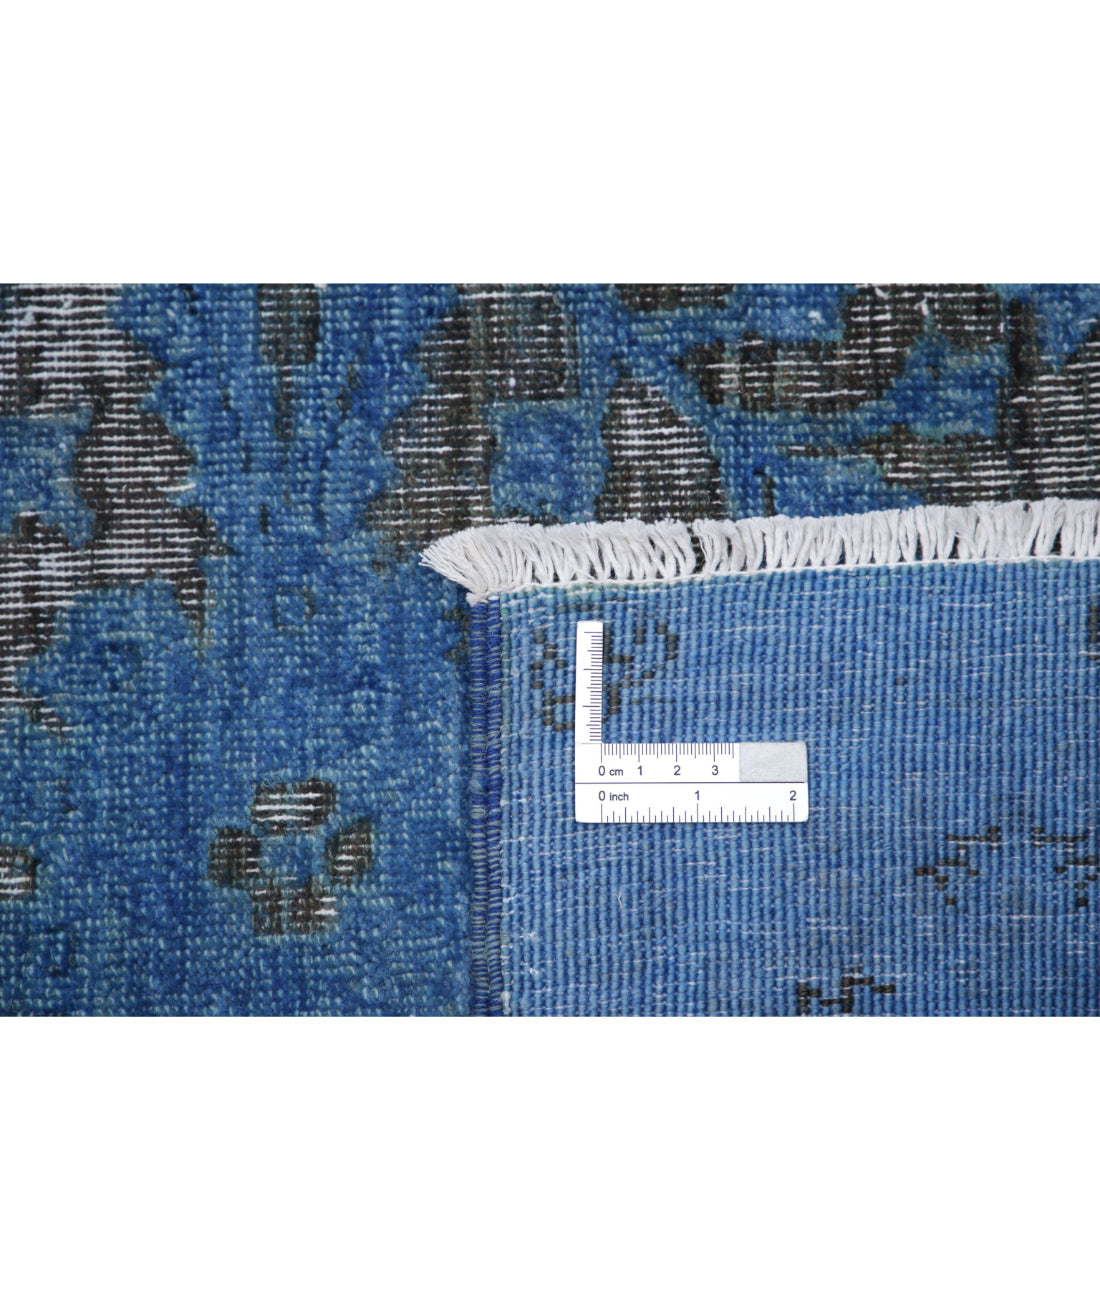 Hand Knotted Onyx Wool Rug - 5'10'' x 8'8'' 5'10'' x 8'8'' (175 X 260) / Blue / Blue